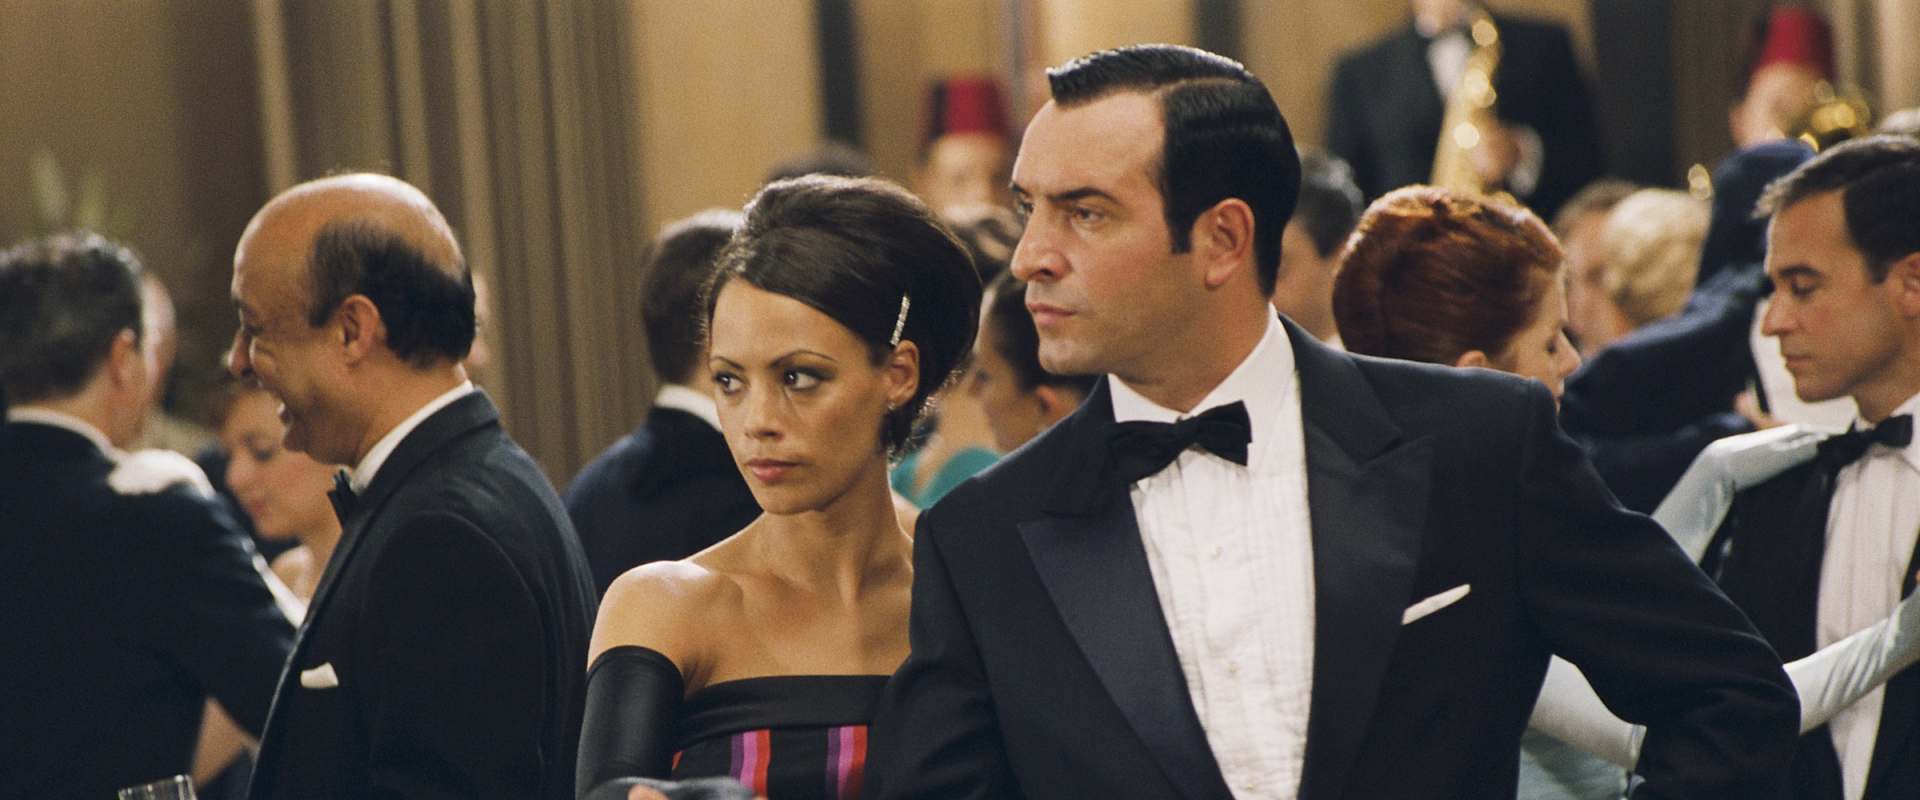 OSS 117: Cairo, Nest of Spies background 1